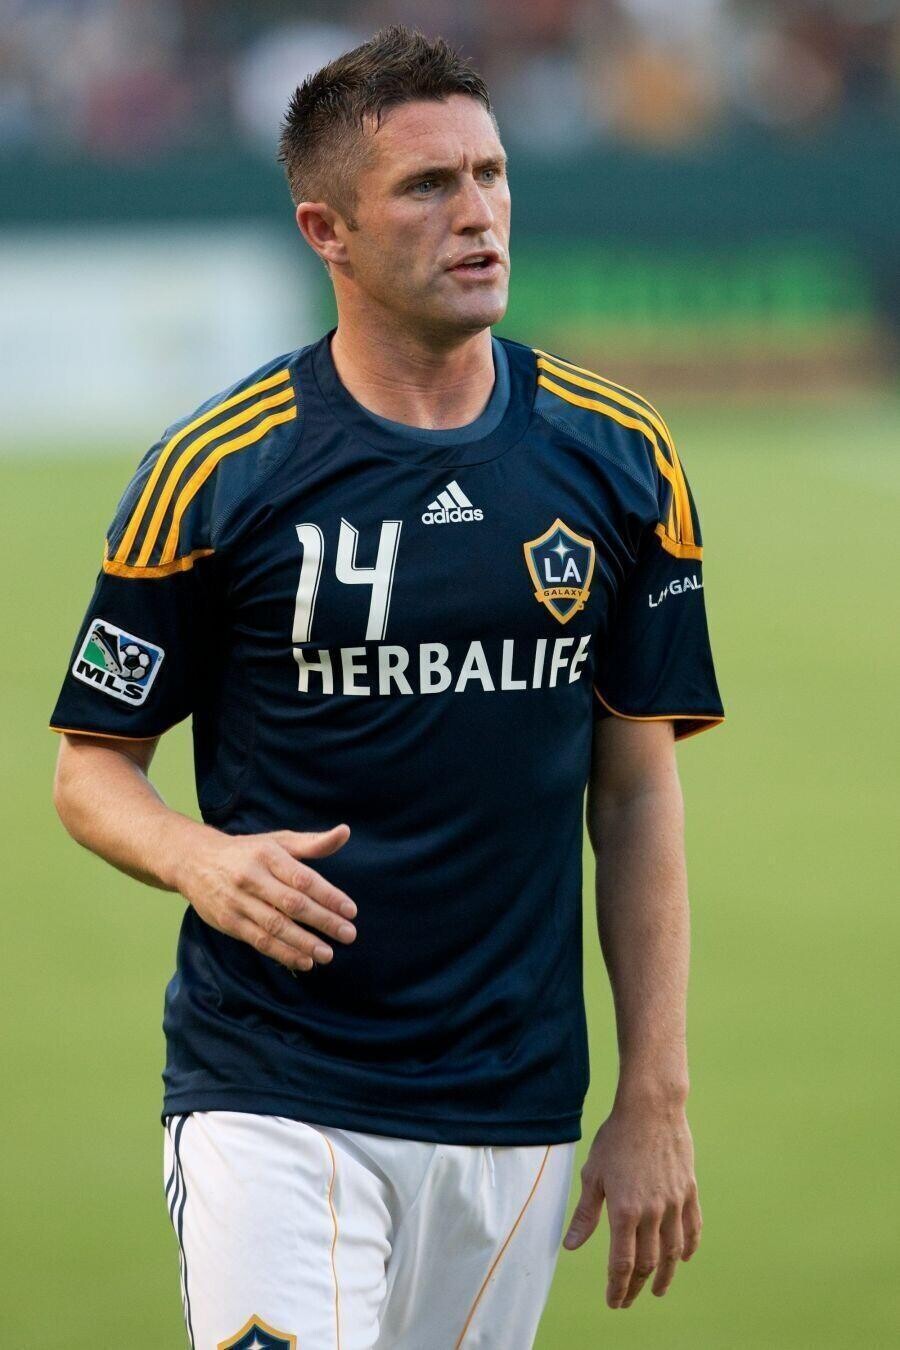 picture of Robbie Keane when playing for LA Galaxy in the MLS